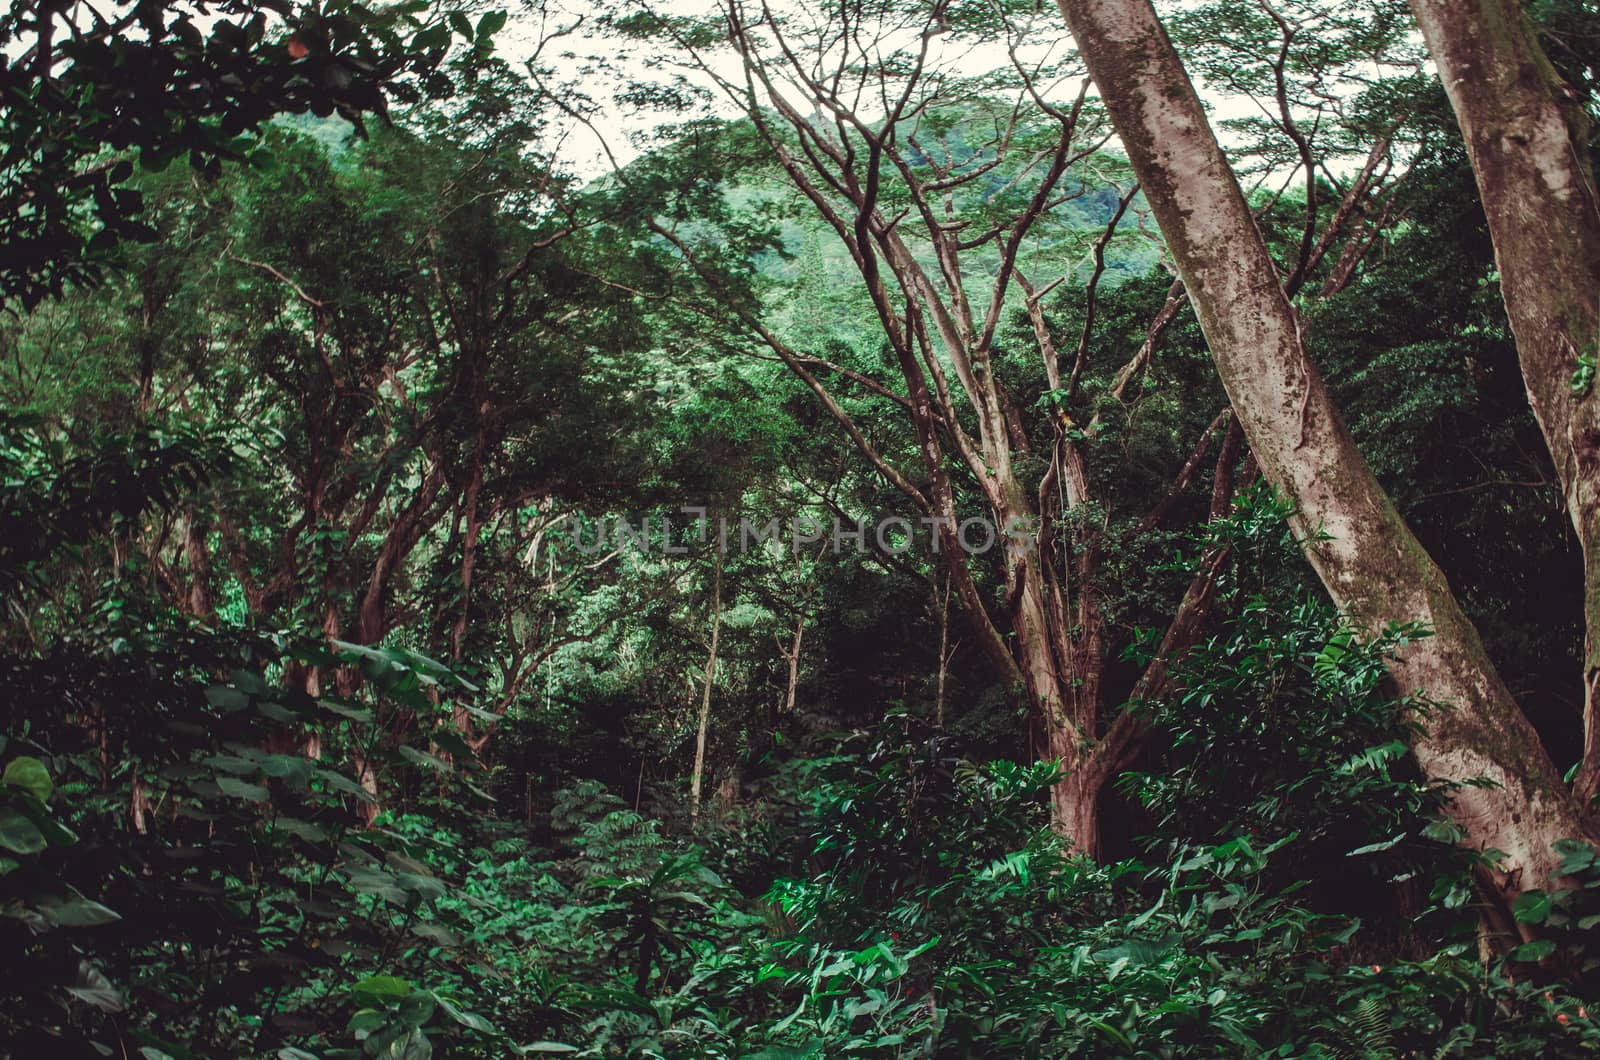 Deep green vegetation with indigenous trees in an almost virgin place in Hawaii by mikelju